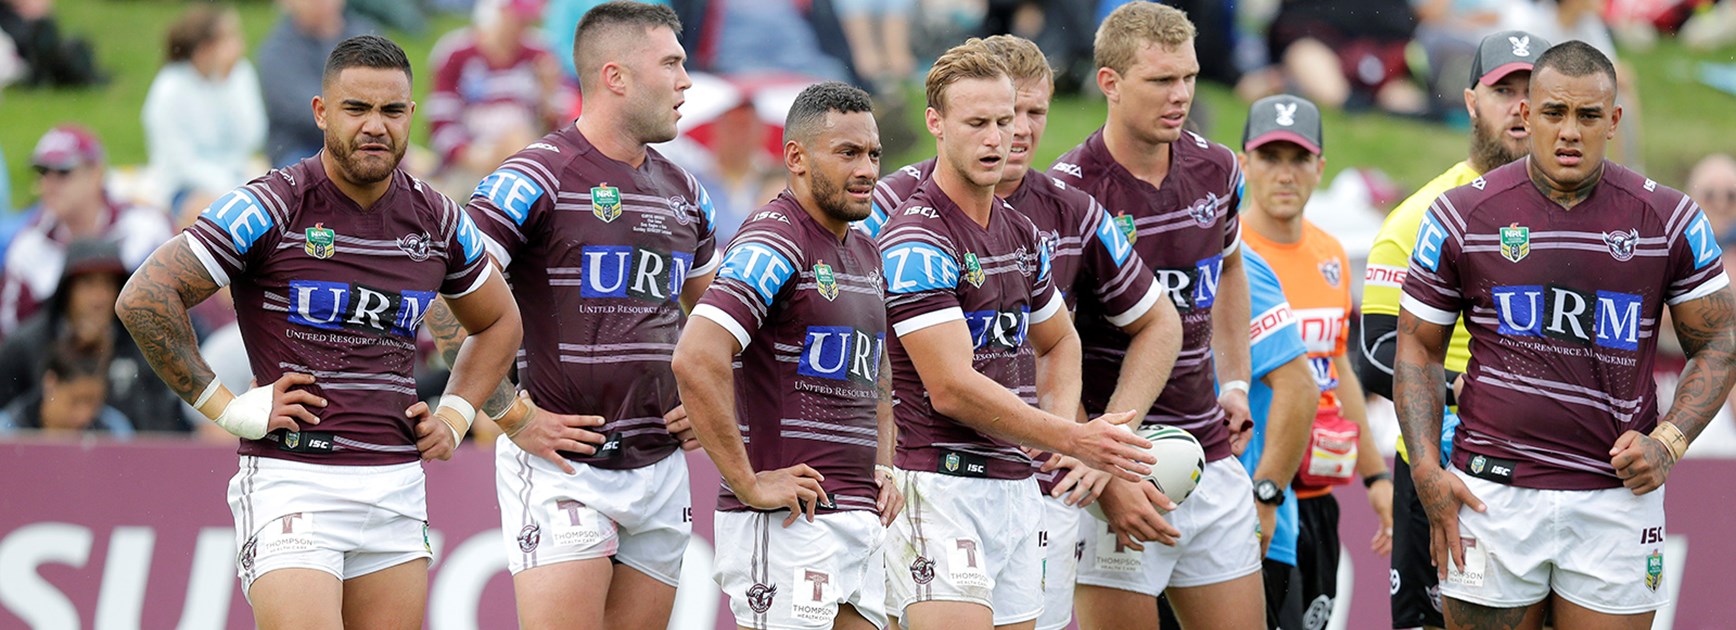 Manly Sea Eagles lost to the Eels in Round 1 of the NRL Telstra Premiership.